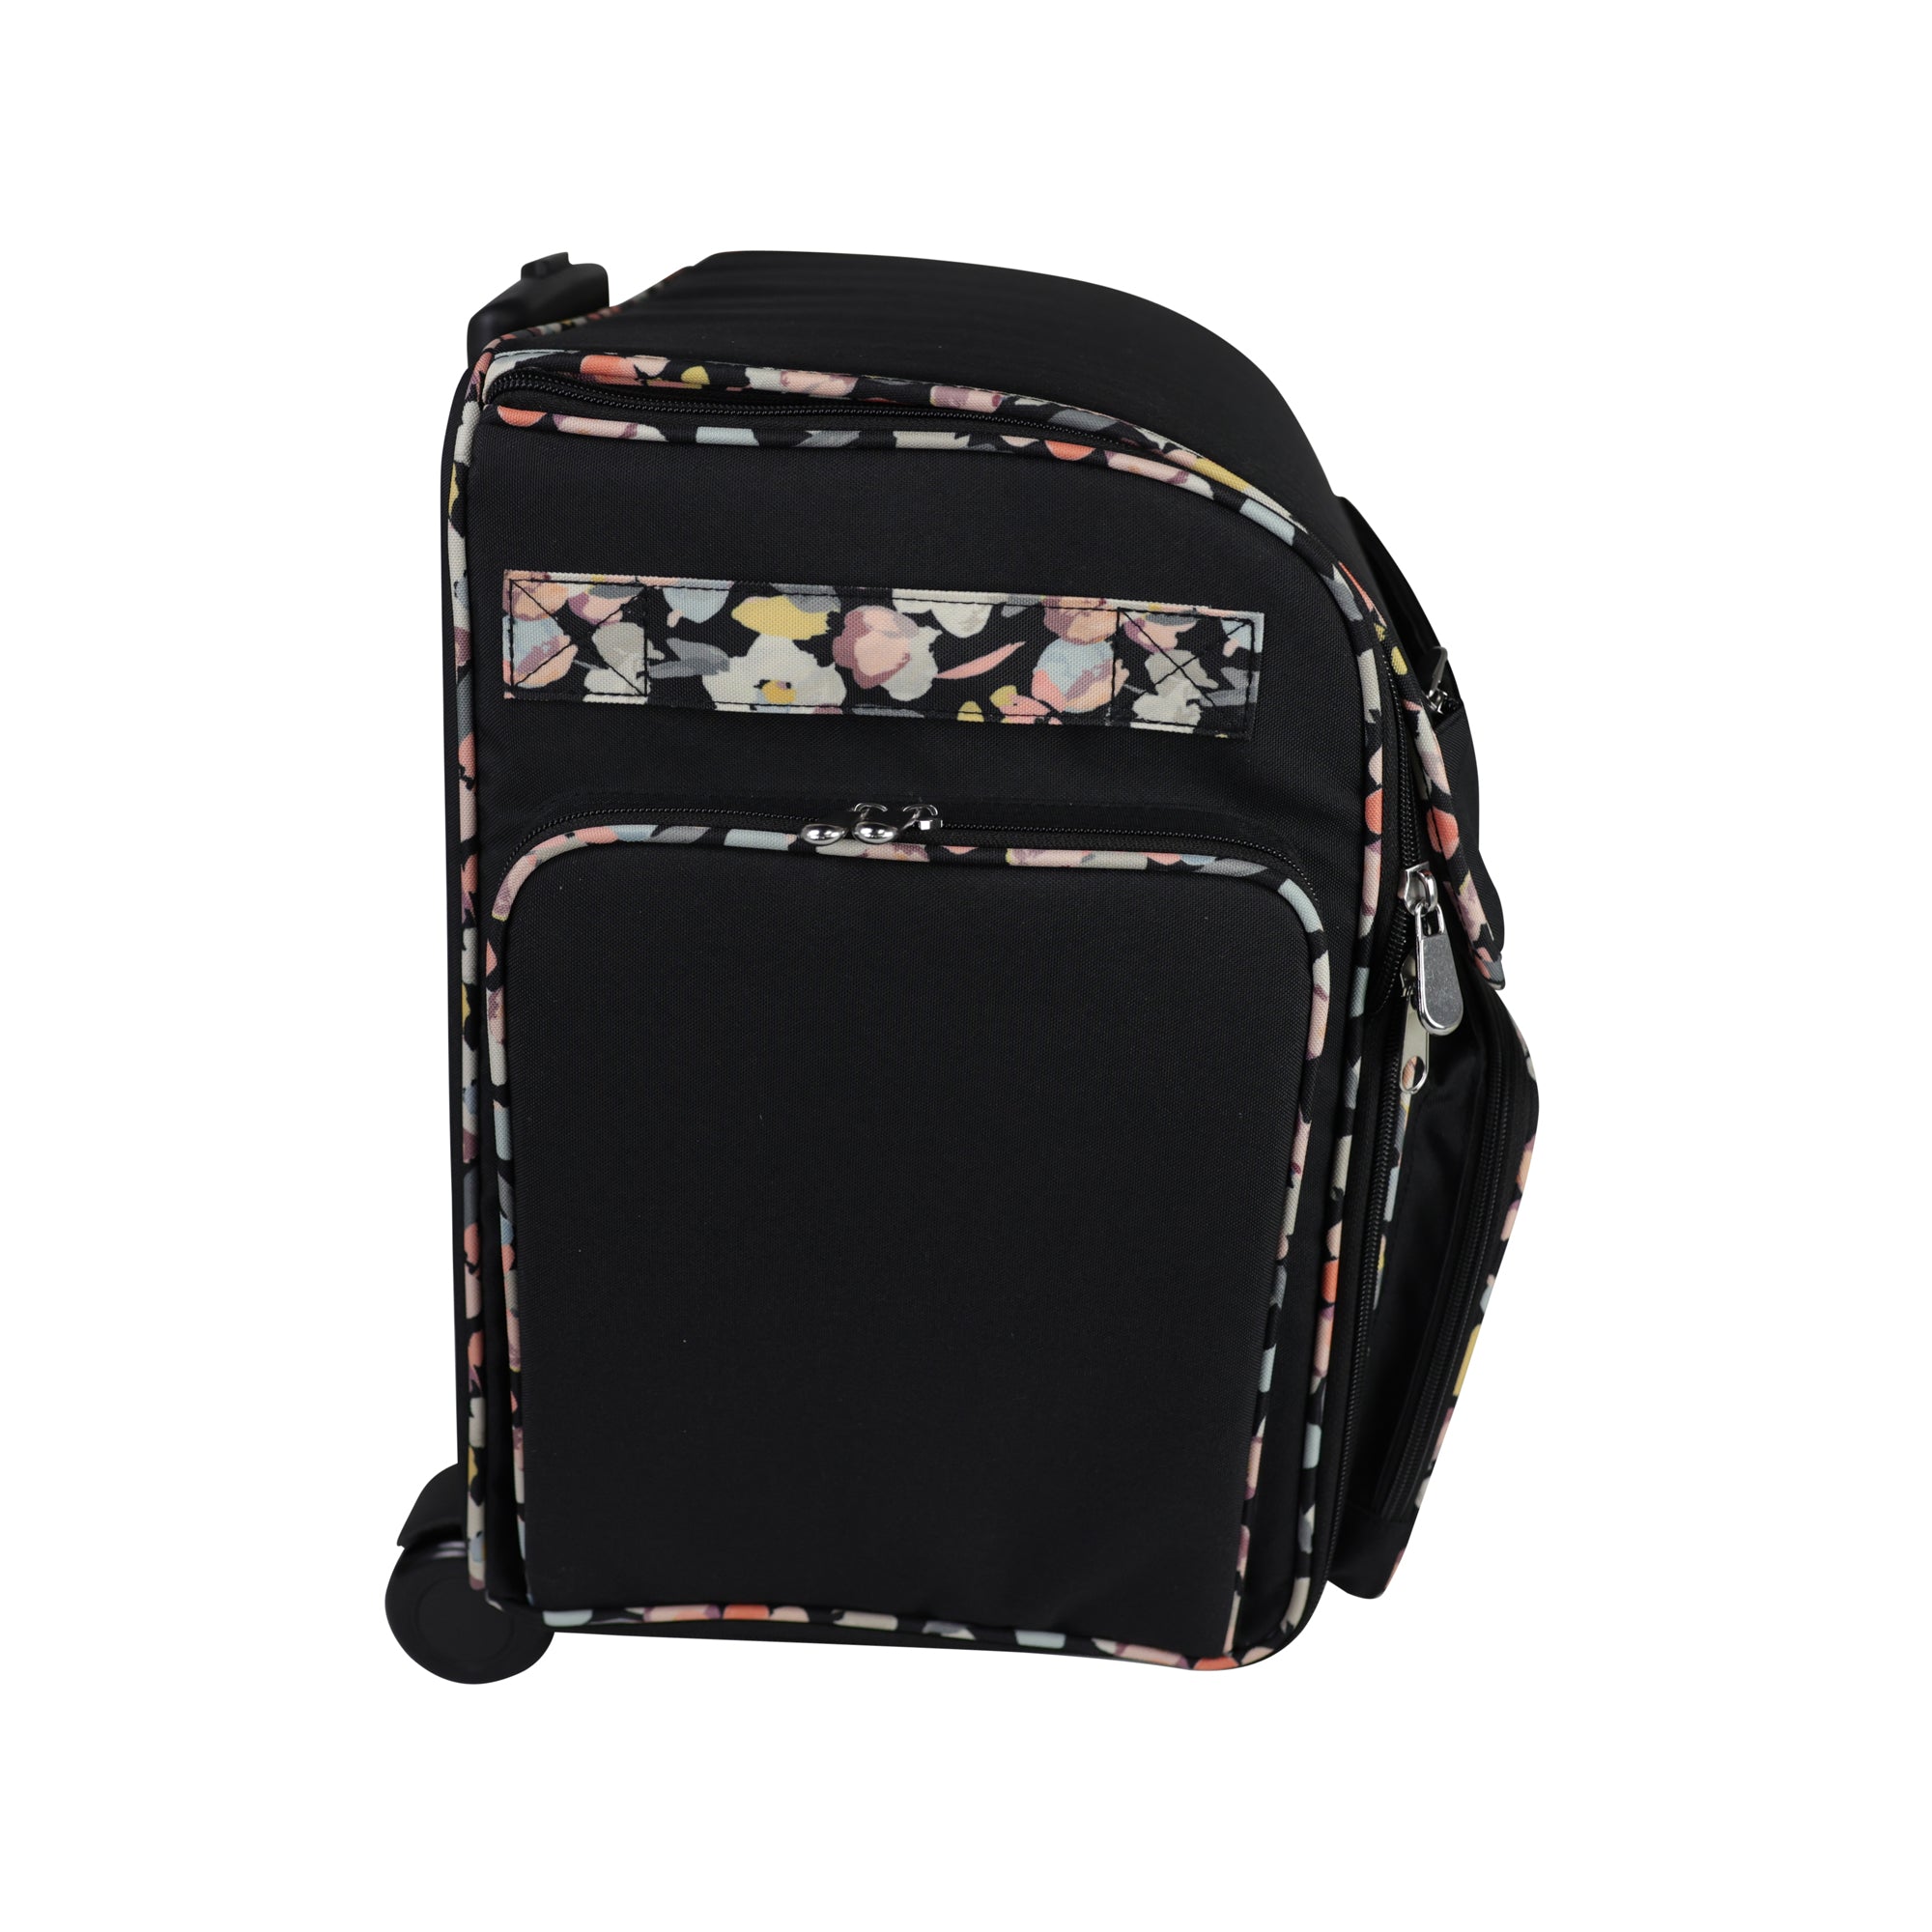 Everything Mary Black & Teal Rolling Craft Bag